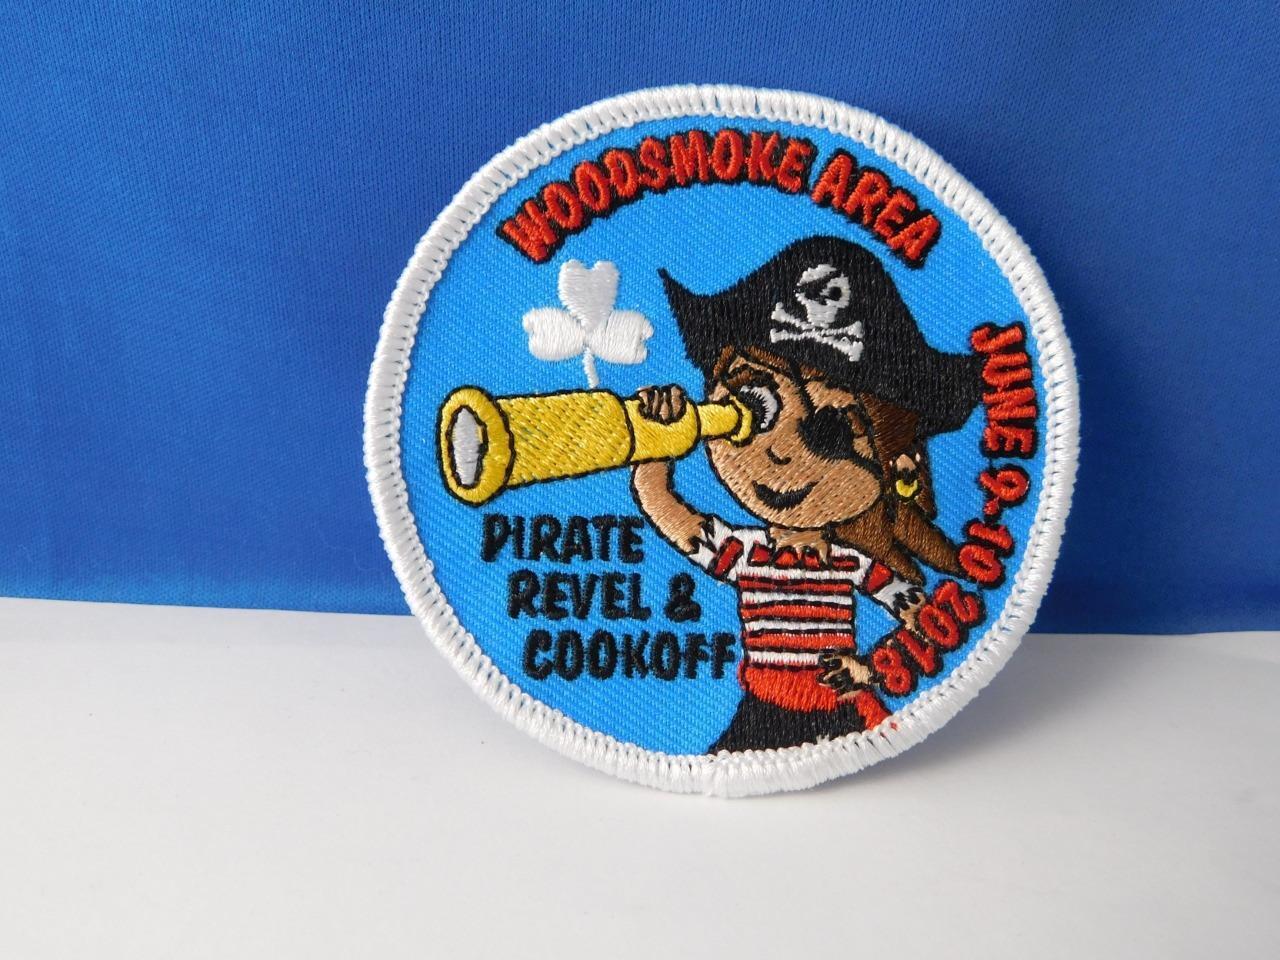 GIRL GUIDES CANADA PATCH WOOD SMOKE AREA PIRATE REVEL COOK OFF 2018 BADGE